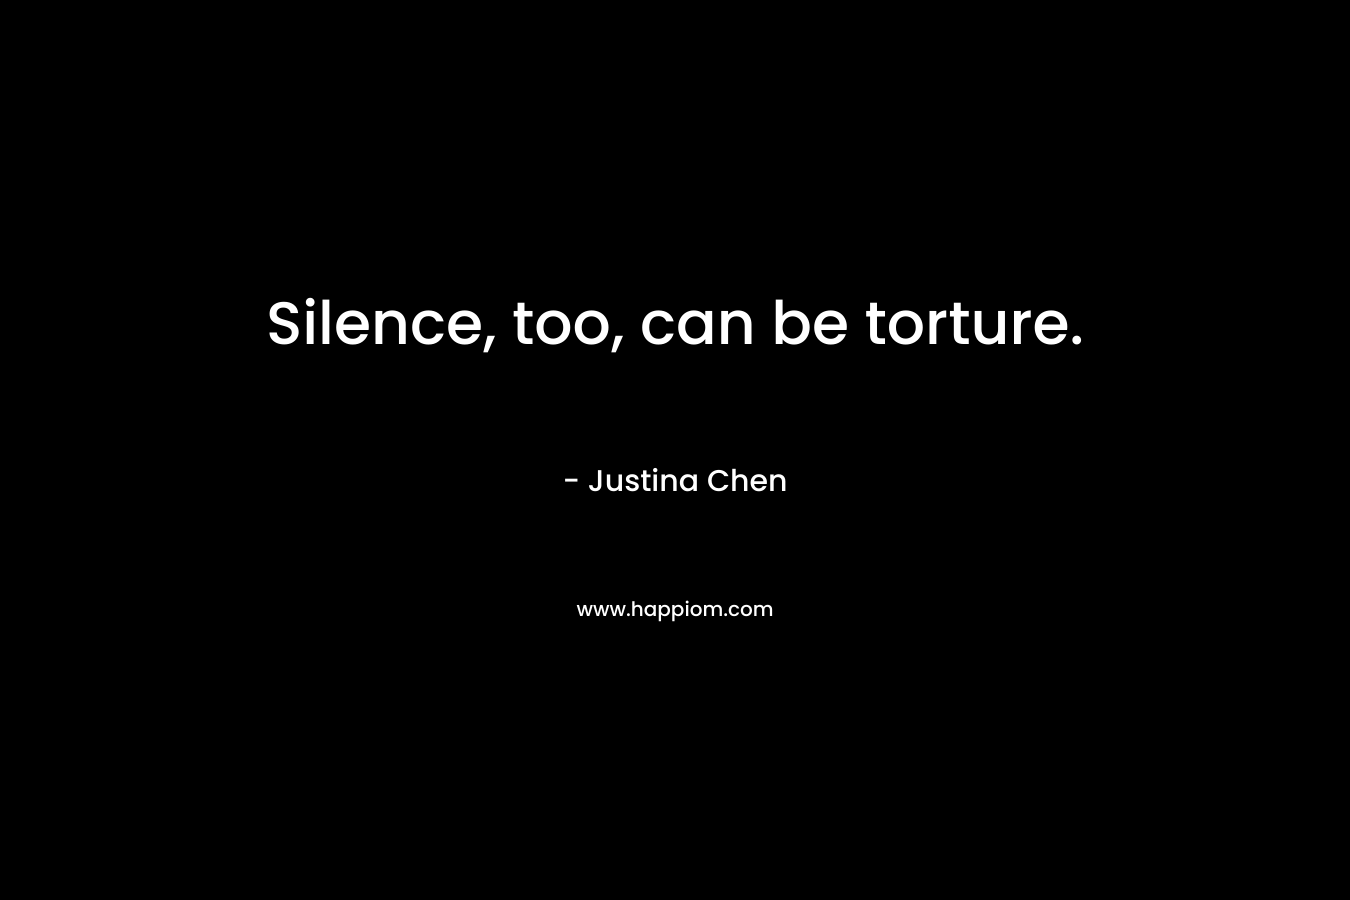 Silence, too, can be torture.